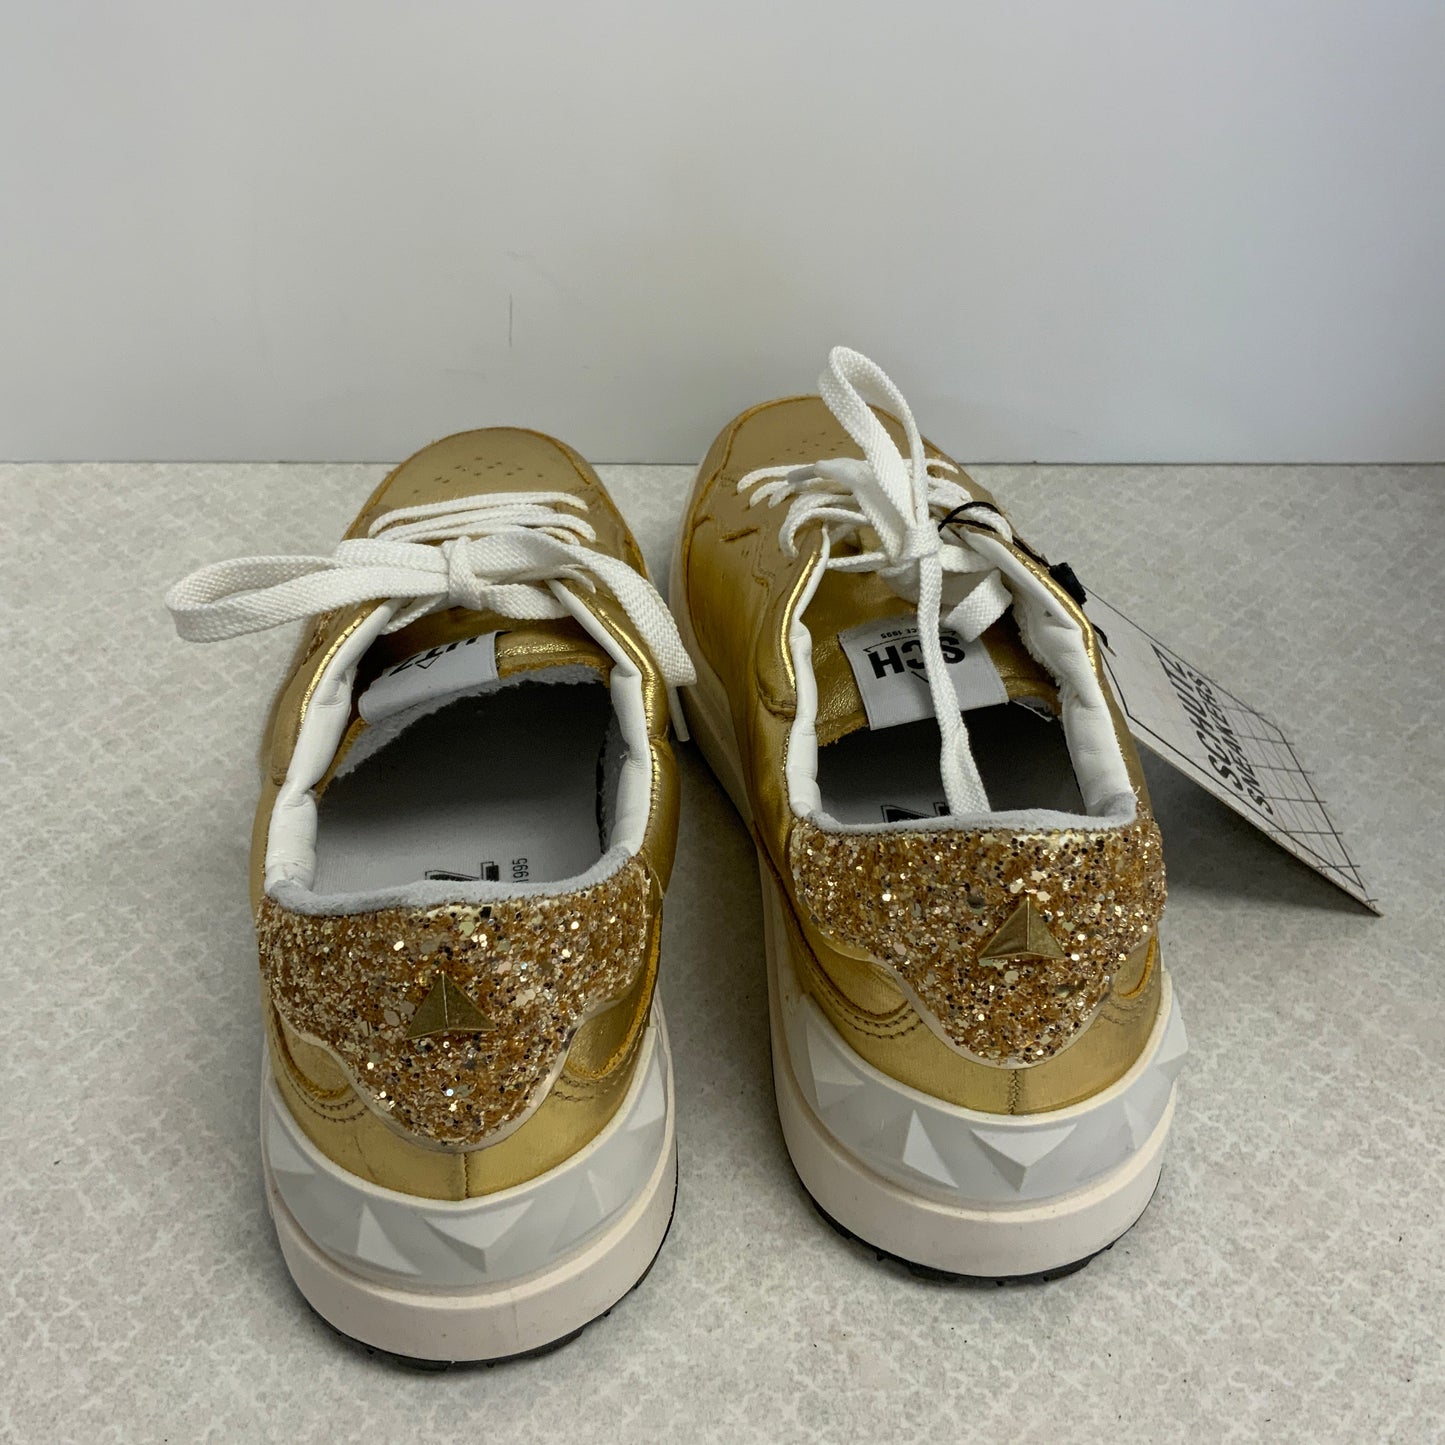 Gold Shoes Sneakers Schutz, Size 9